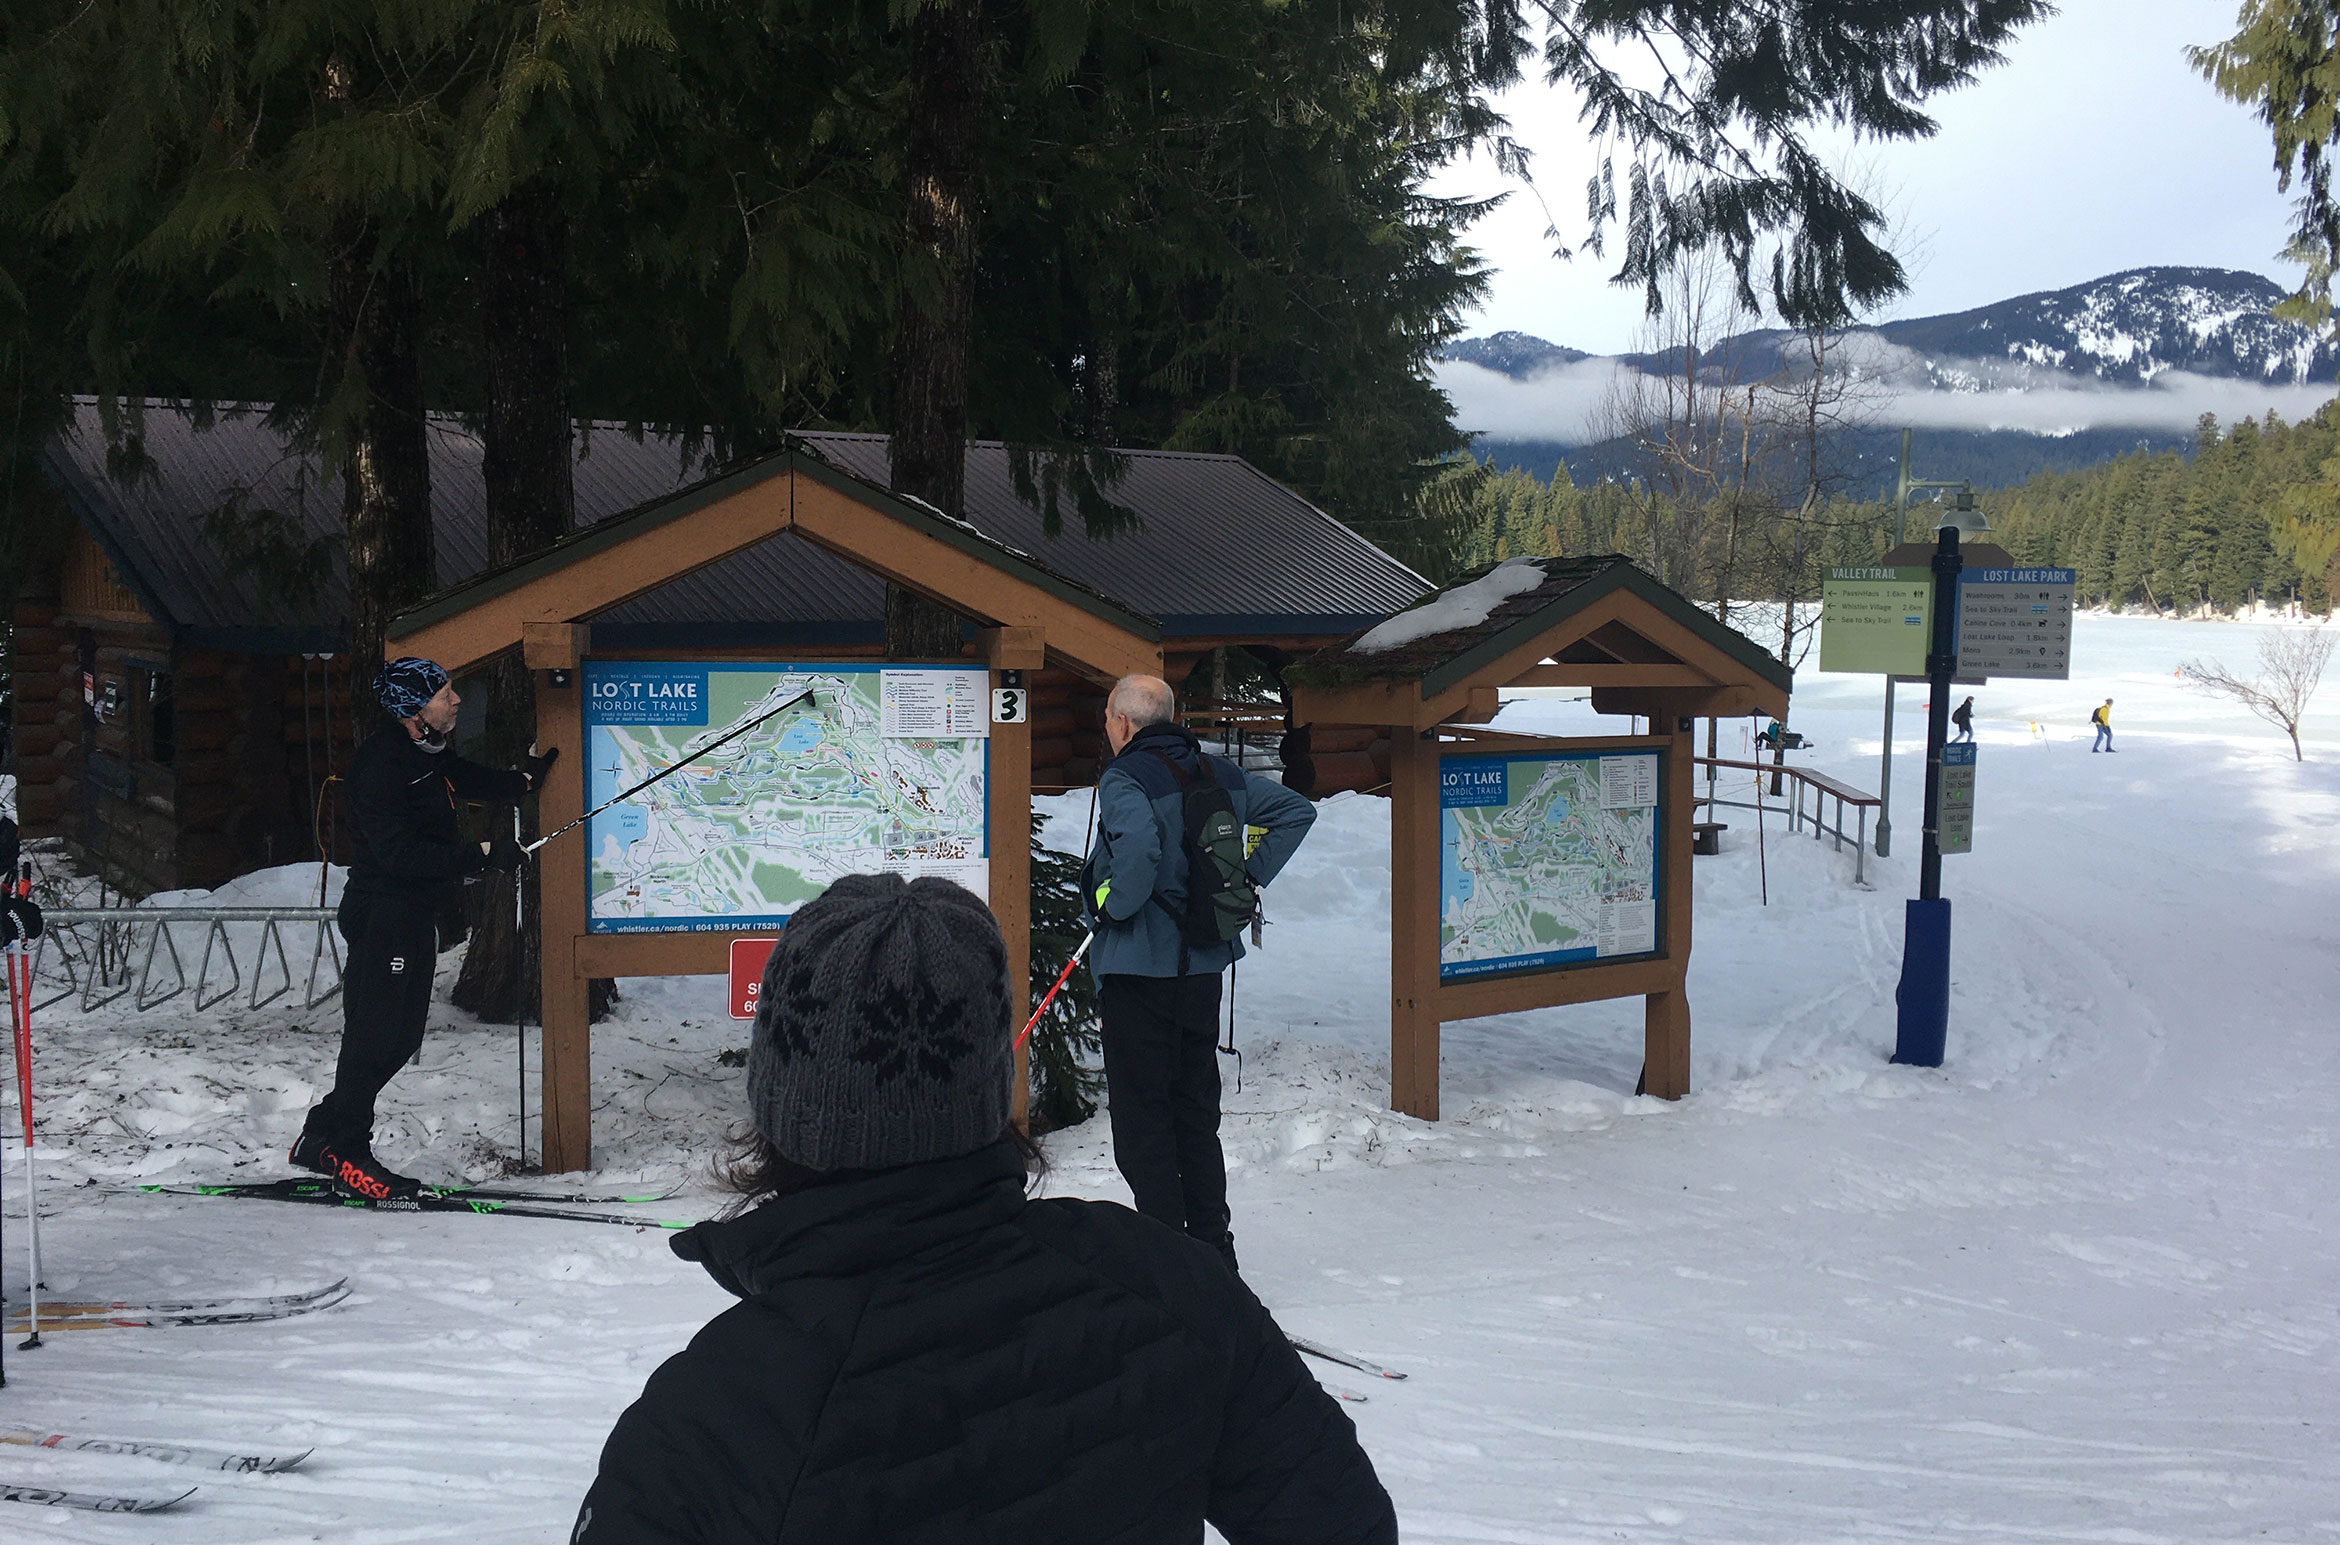 Cross-country skiers look at the map for Lost Lake in Whistler.